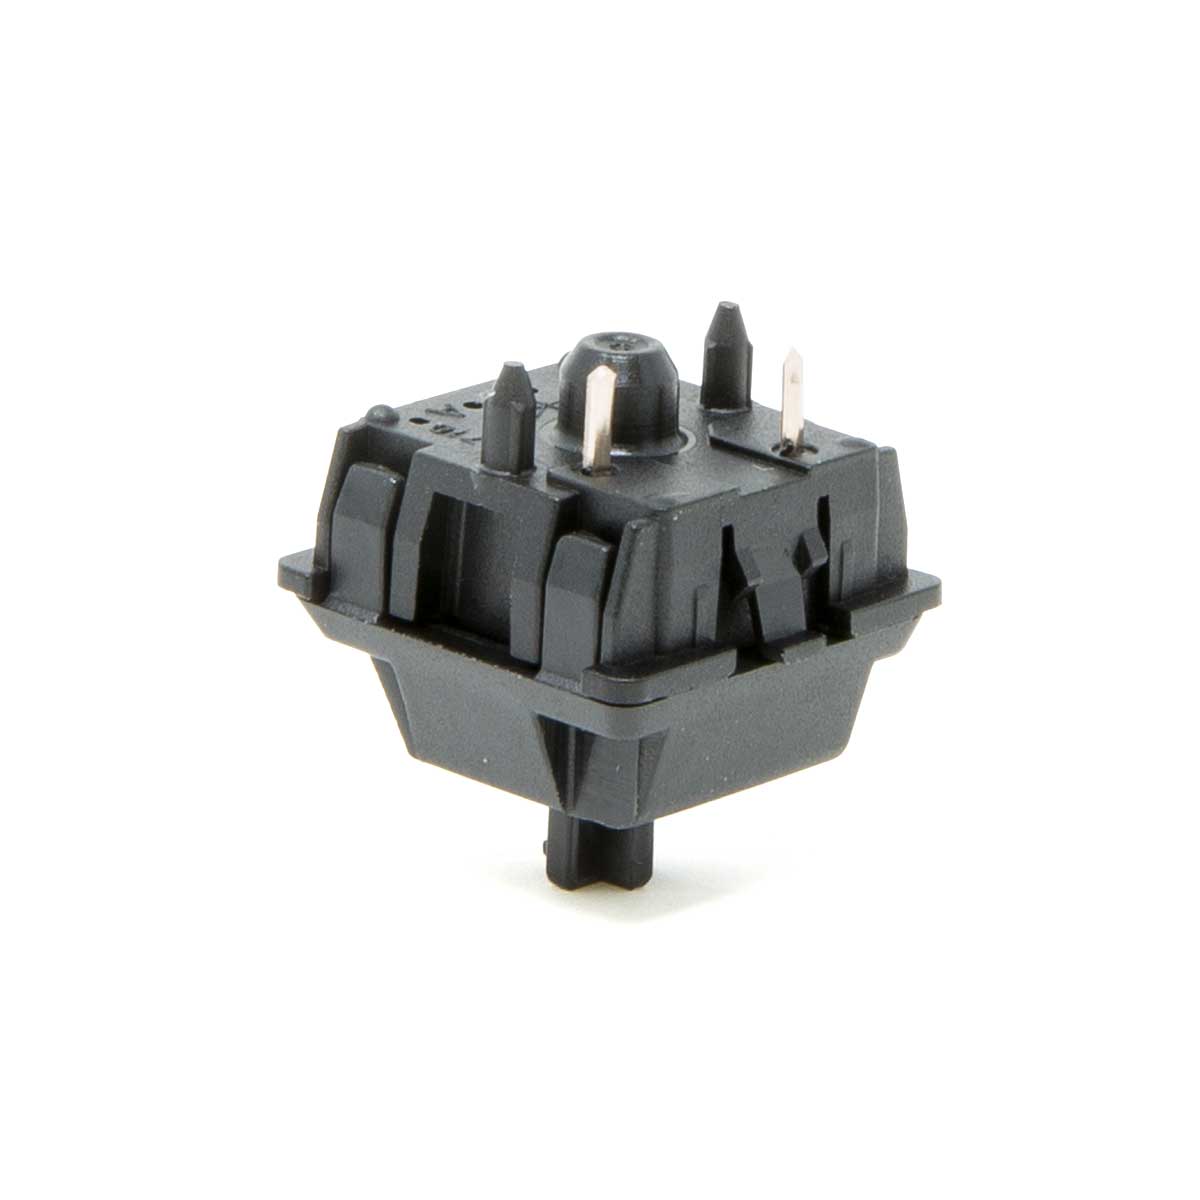 Cherry MX Hyperglide PCB Mount Switches